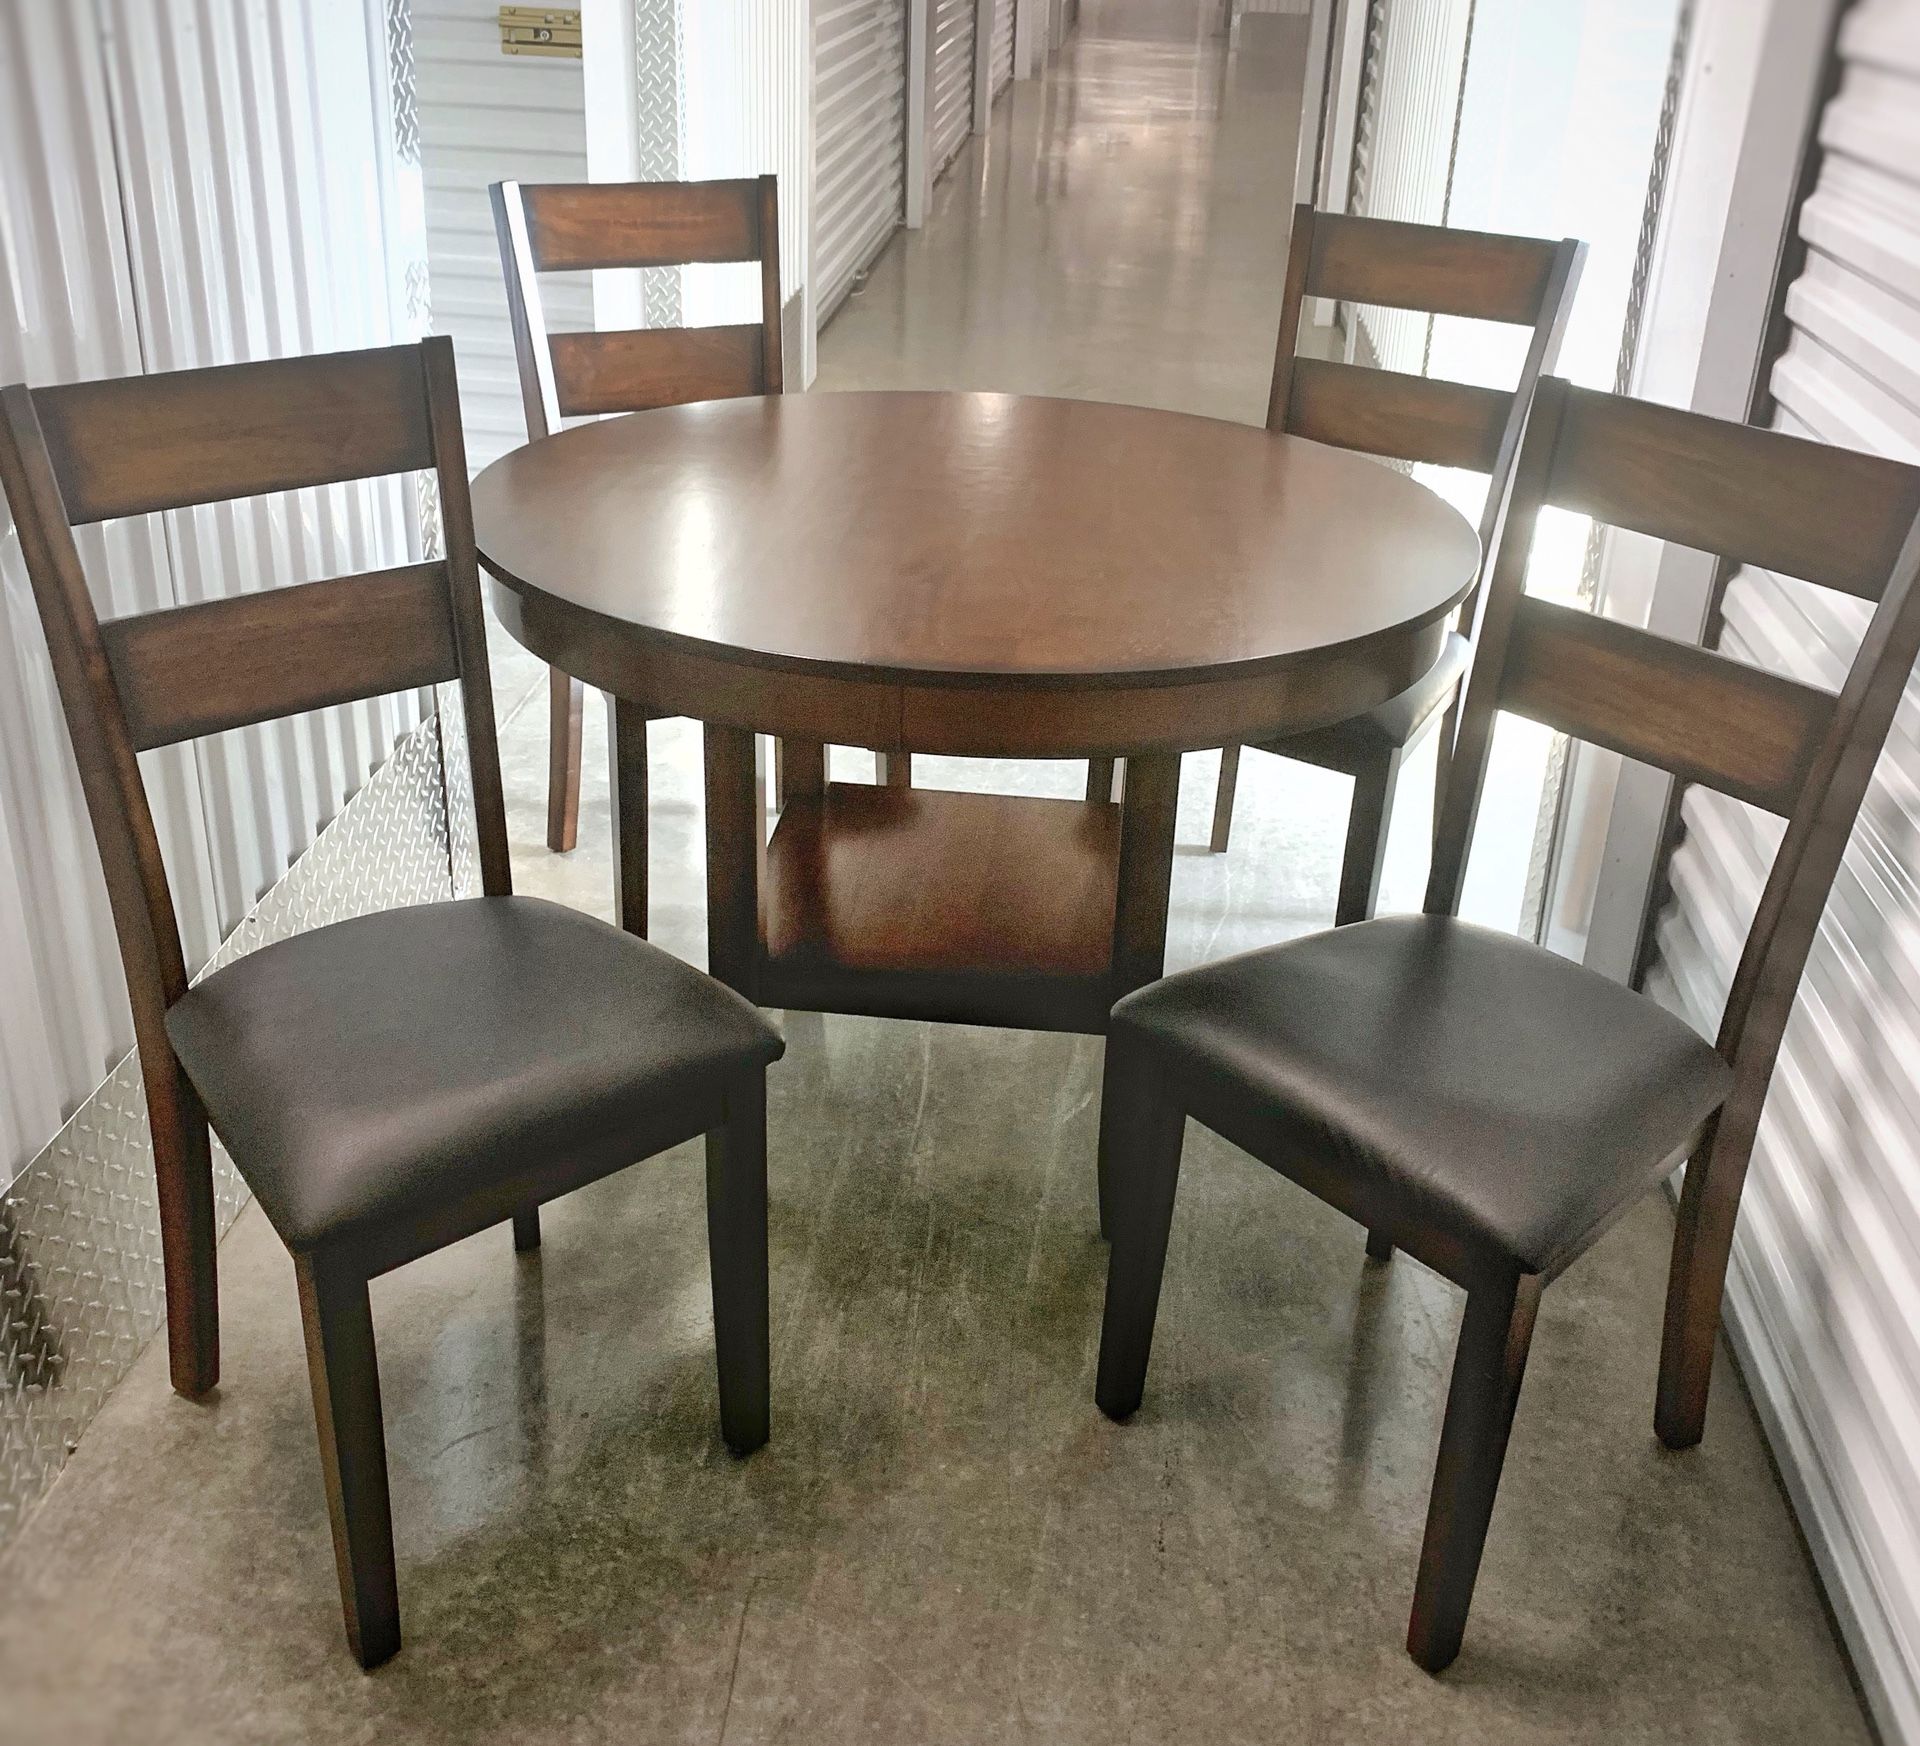 Dining Set - Round Table & 4 Chairs